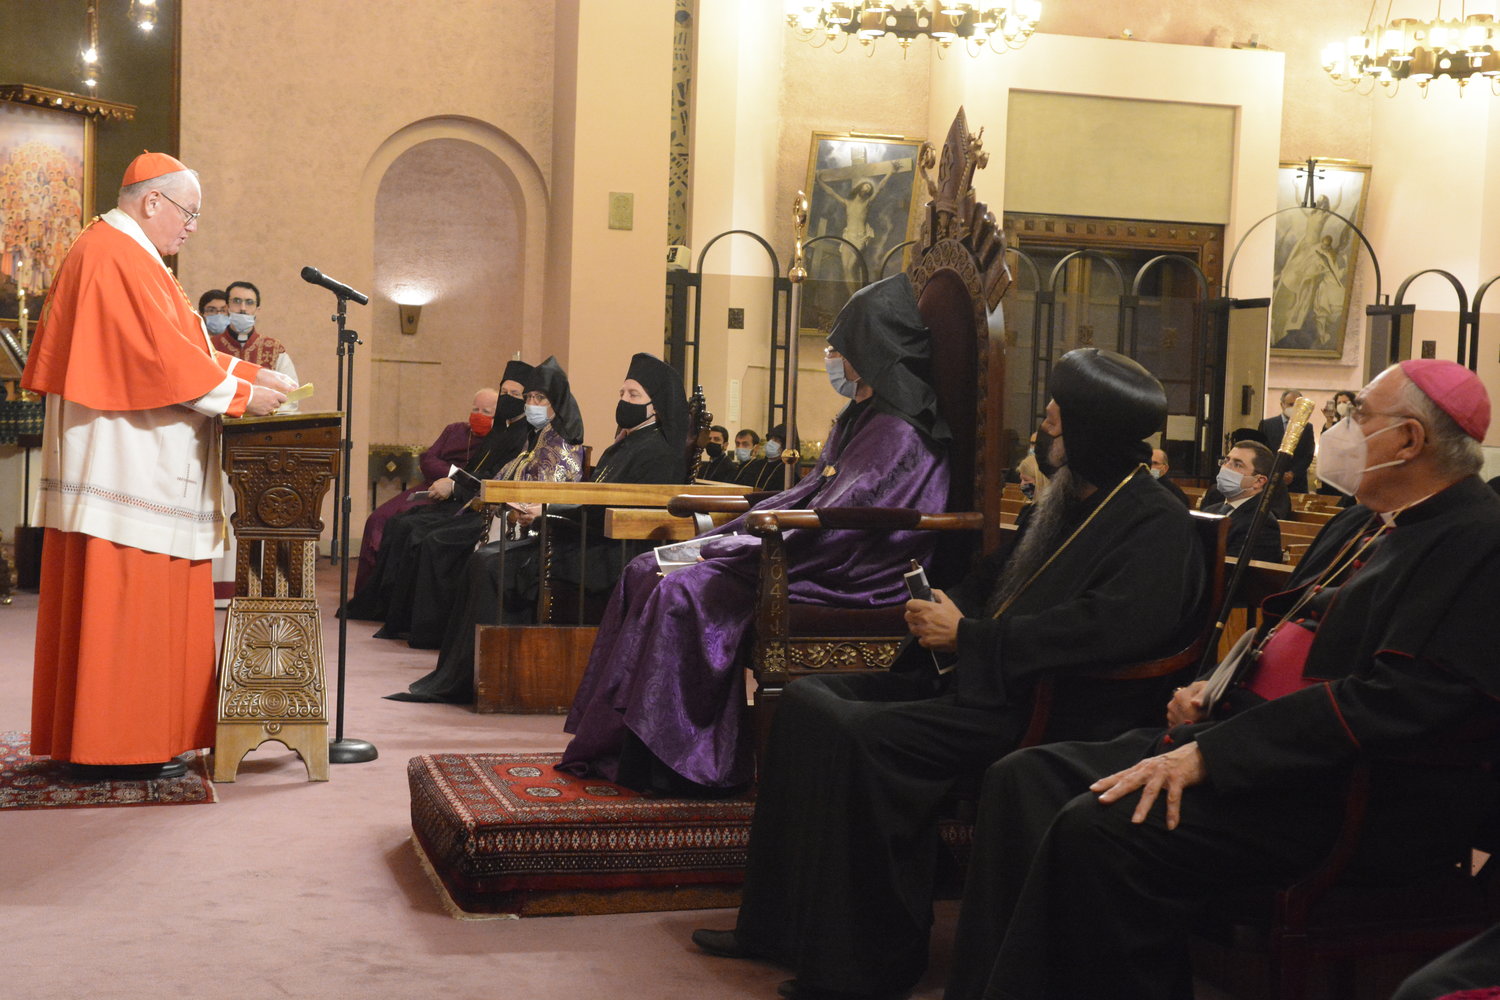 PRAYERS FOR ARMENIANS—Cardinal Dolan speaks during “An Ecumenical Service for Peace and Justice in Armenia, Artsakh and the World” at St. Vartan Armenian Cathedral in Manhattan Oct. 21. Seated from near right to left are Bishop Nicholas DiMarzio of the Diocese of Brooklyn; Bishop David of the Coptic Orthodox Diocese of New York and New England; and Bishop Daniel Findikyan, primate of the Eastern Diocese of the Armenian Church of America.